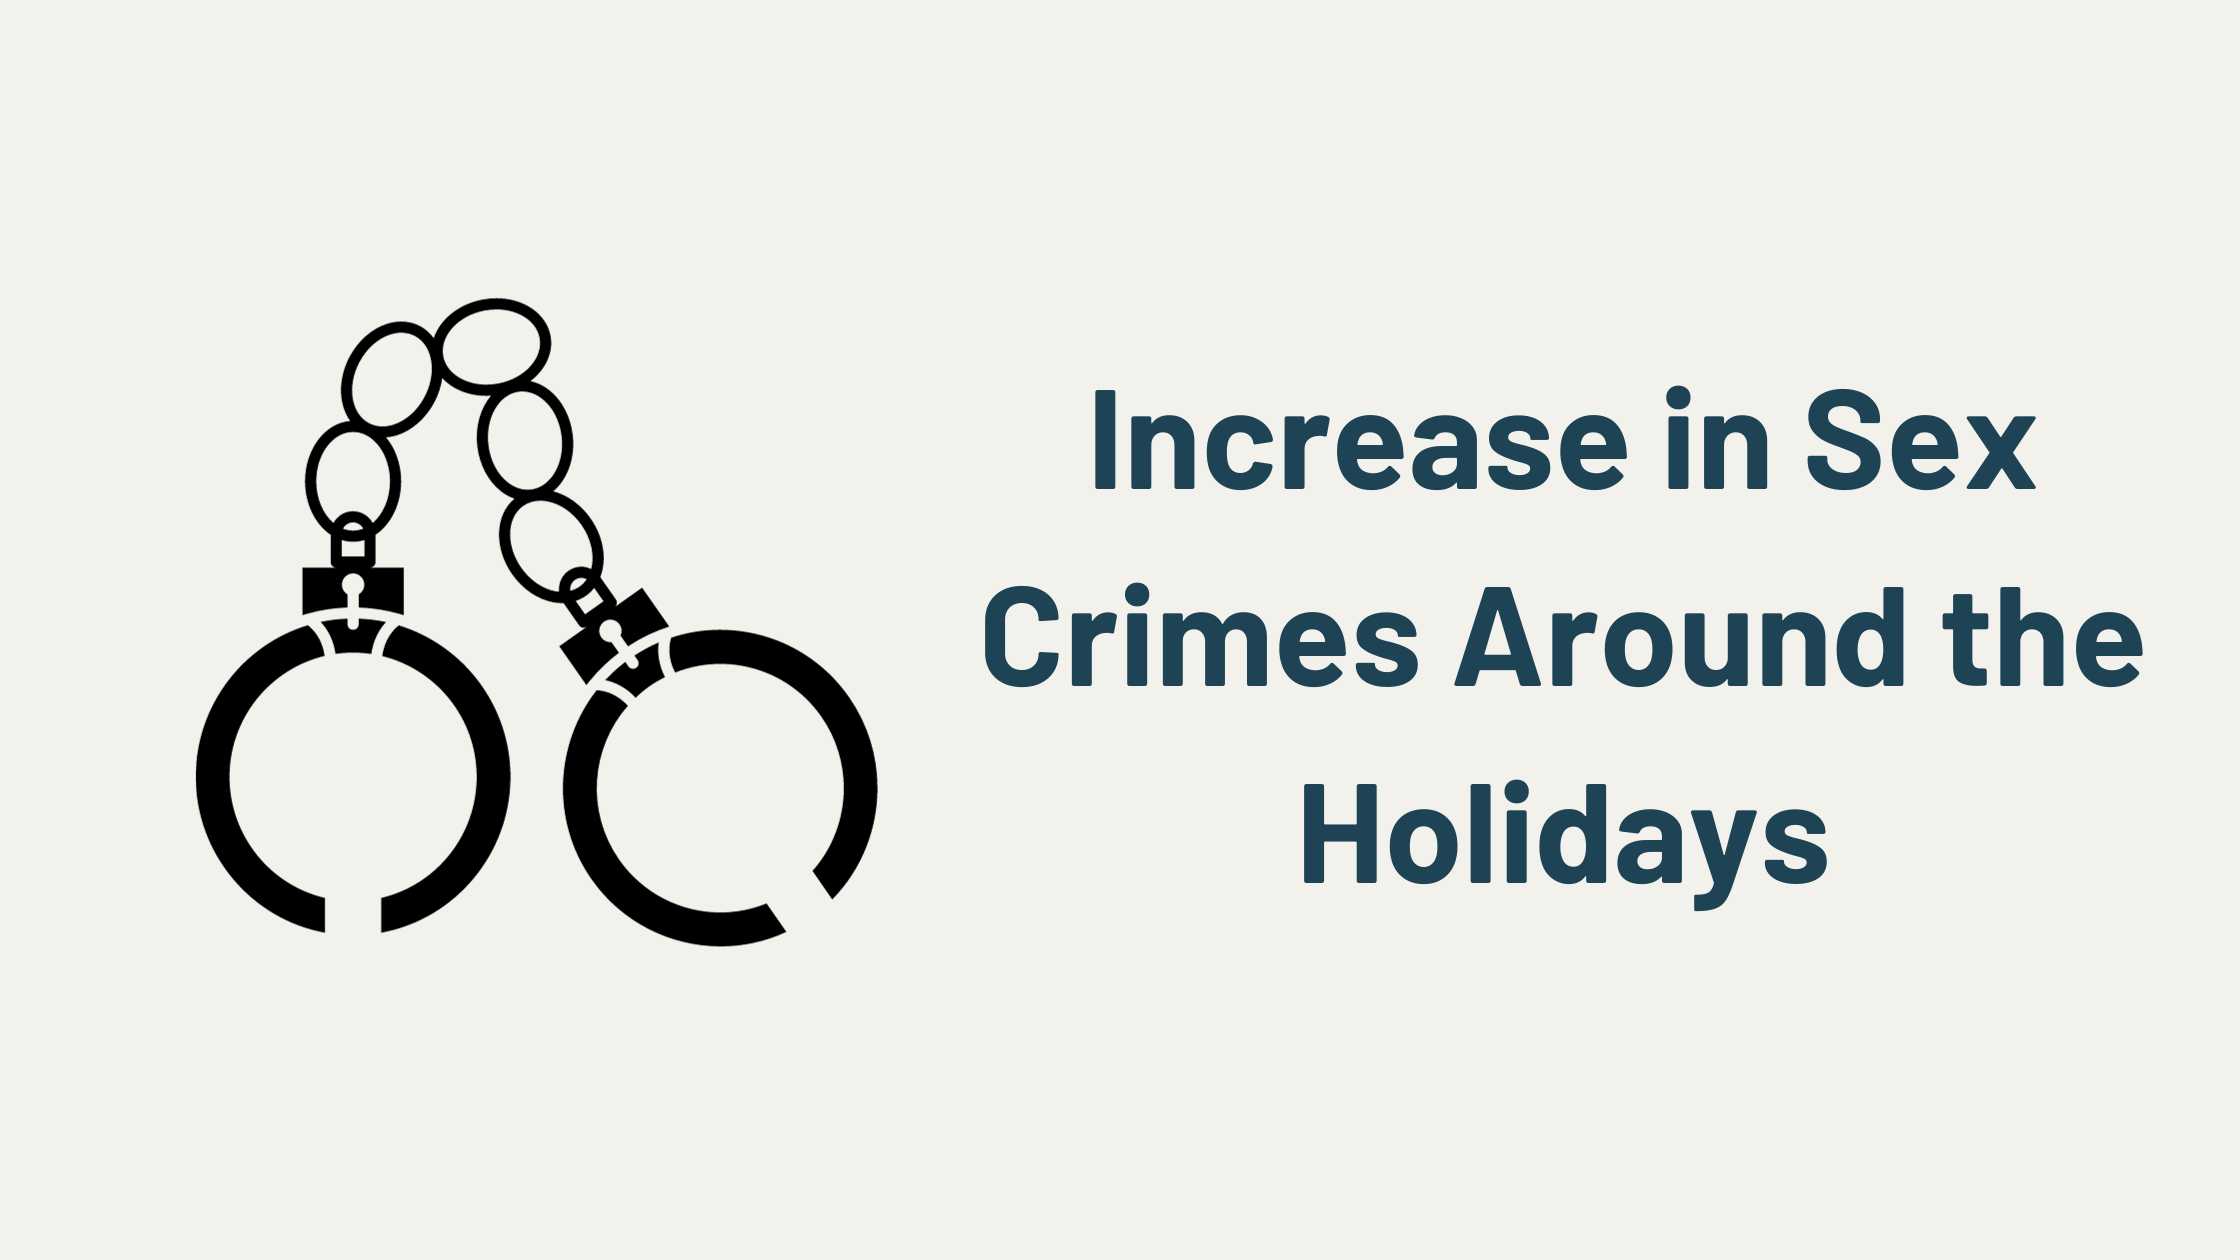 Increase in Sex Crimes Around the Holidays